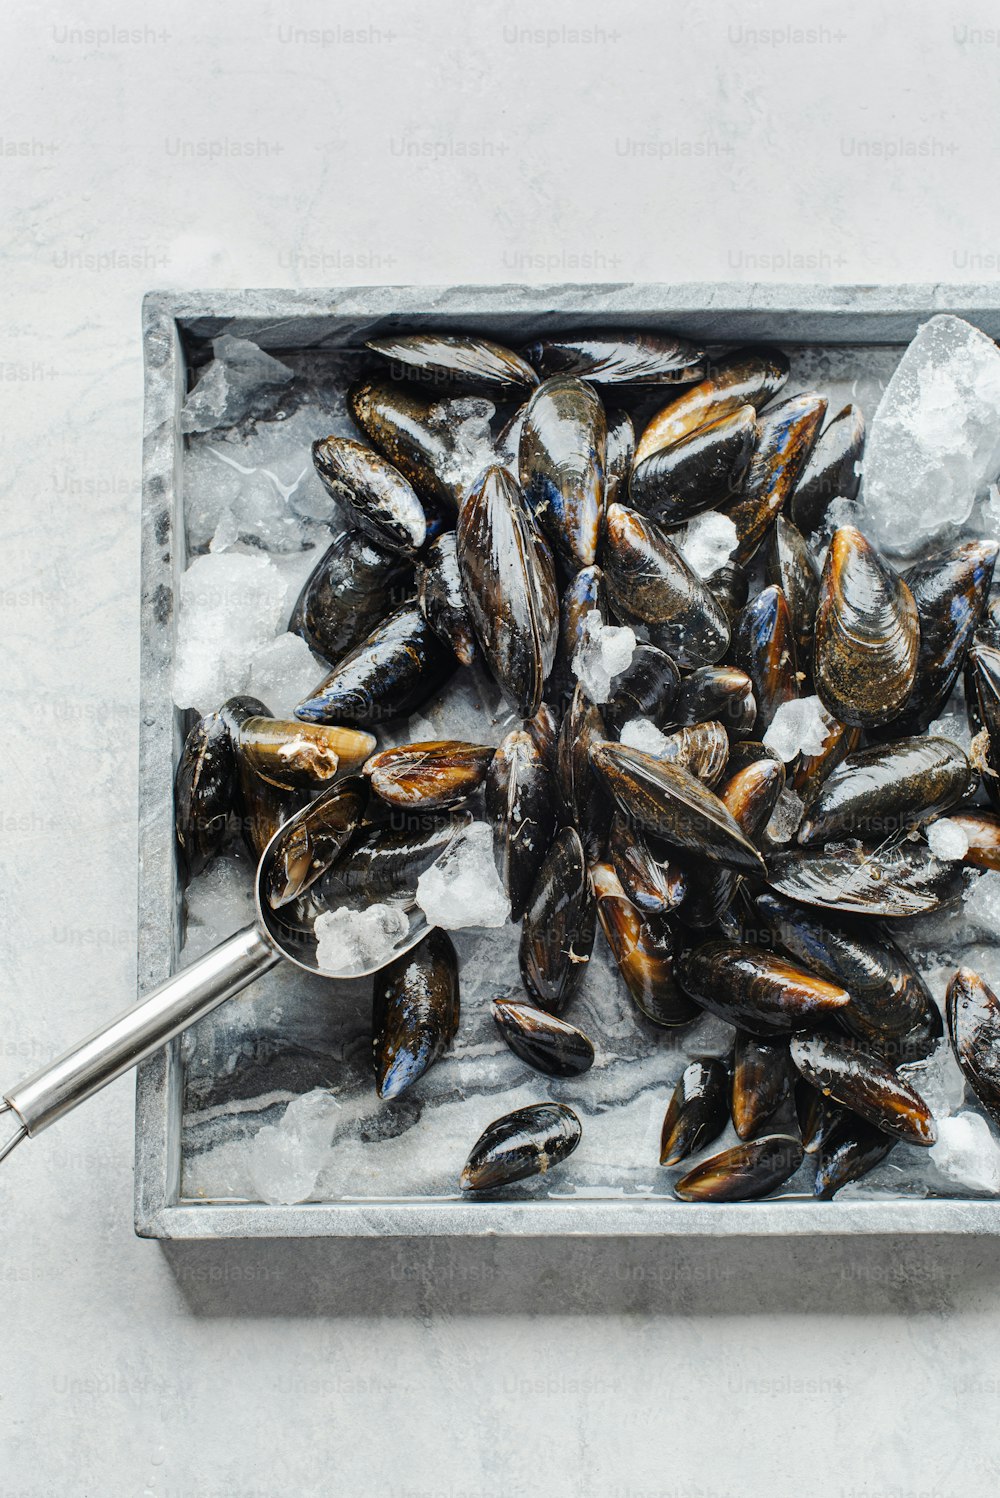 a metal tray filled with mussels and ice